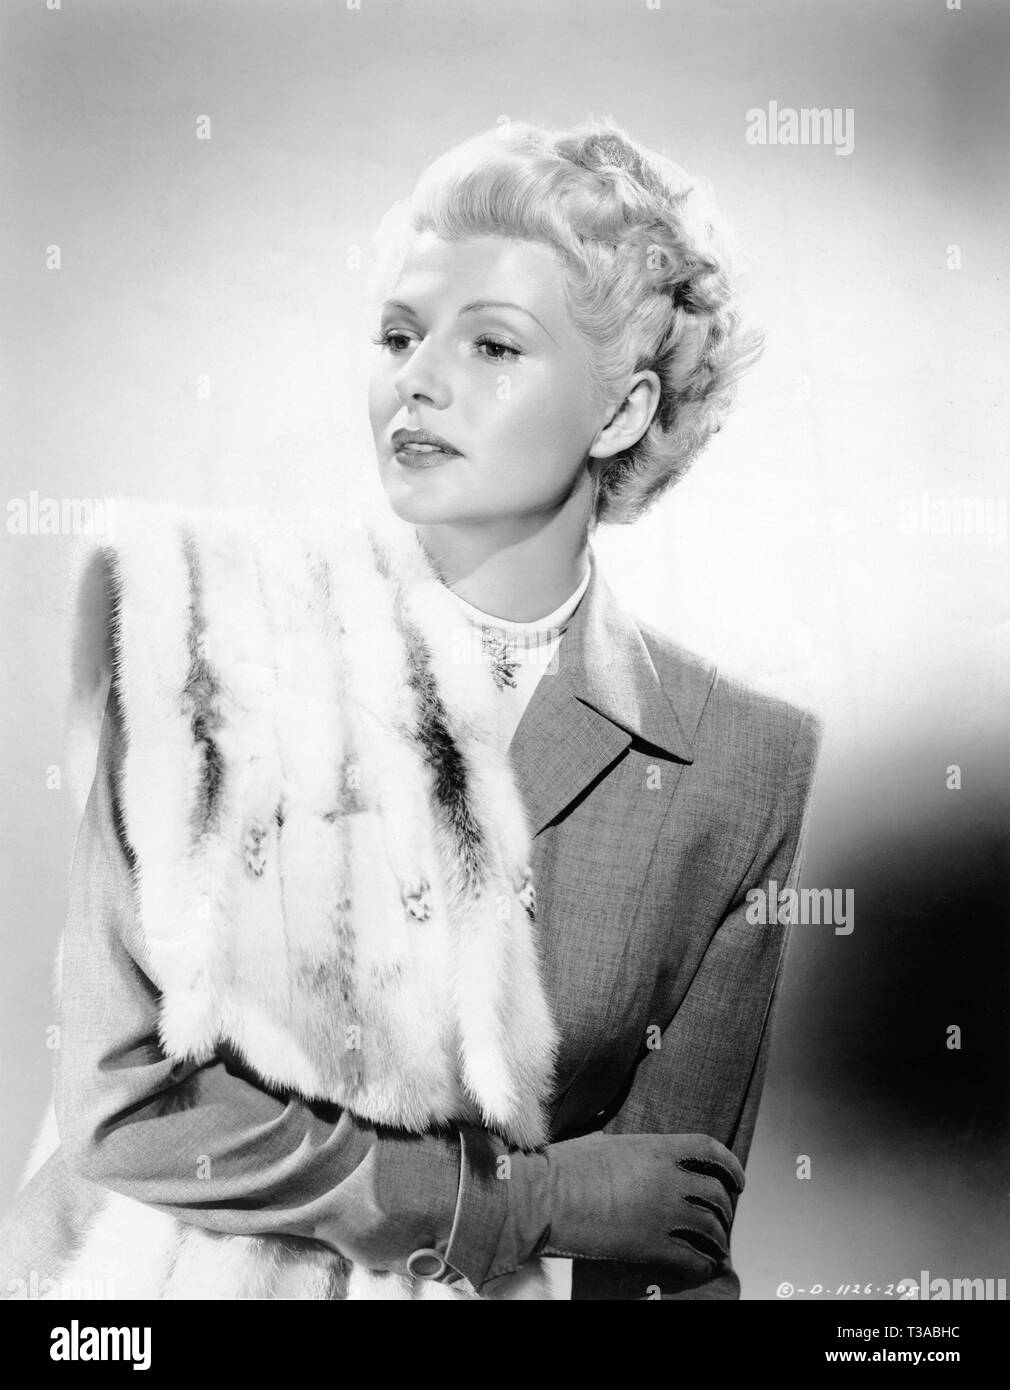 Rita Hayworth portrait as Elsa Bannister THE LADY FROM SHANGHAI 1947 director Orson Welles Costume by Jean Louis Film Noir Columbia Pictures Stock Photo